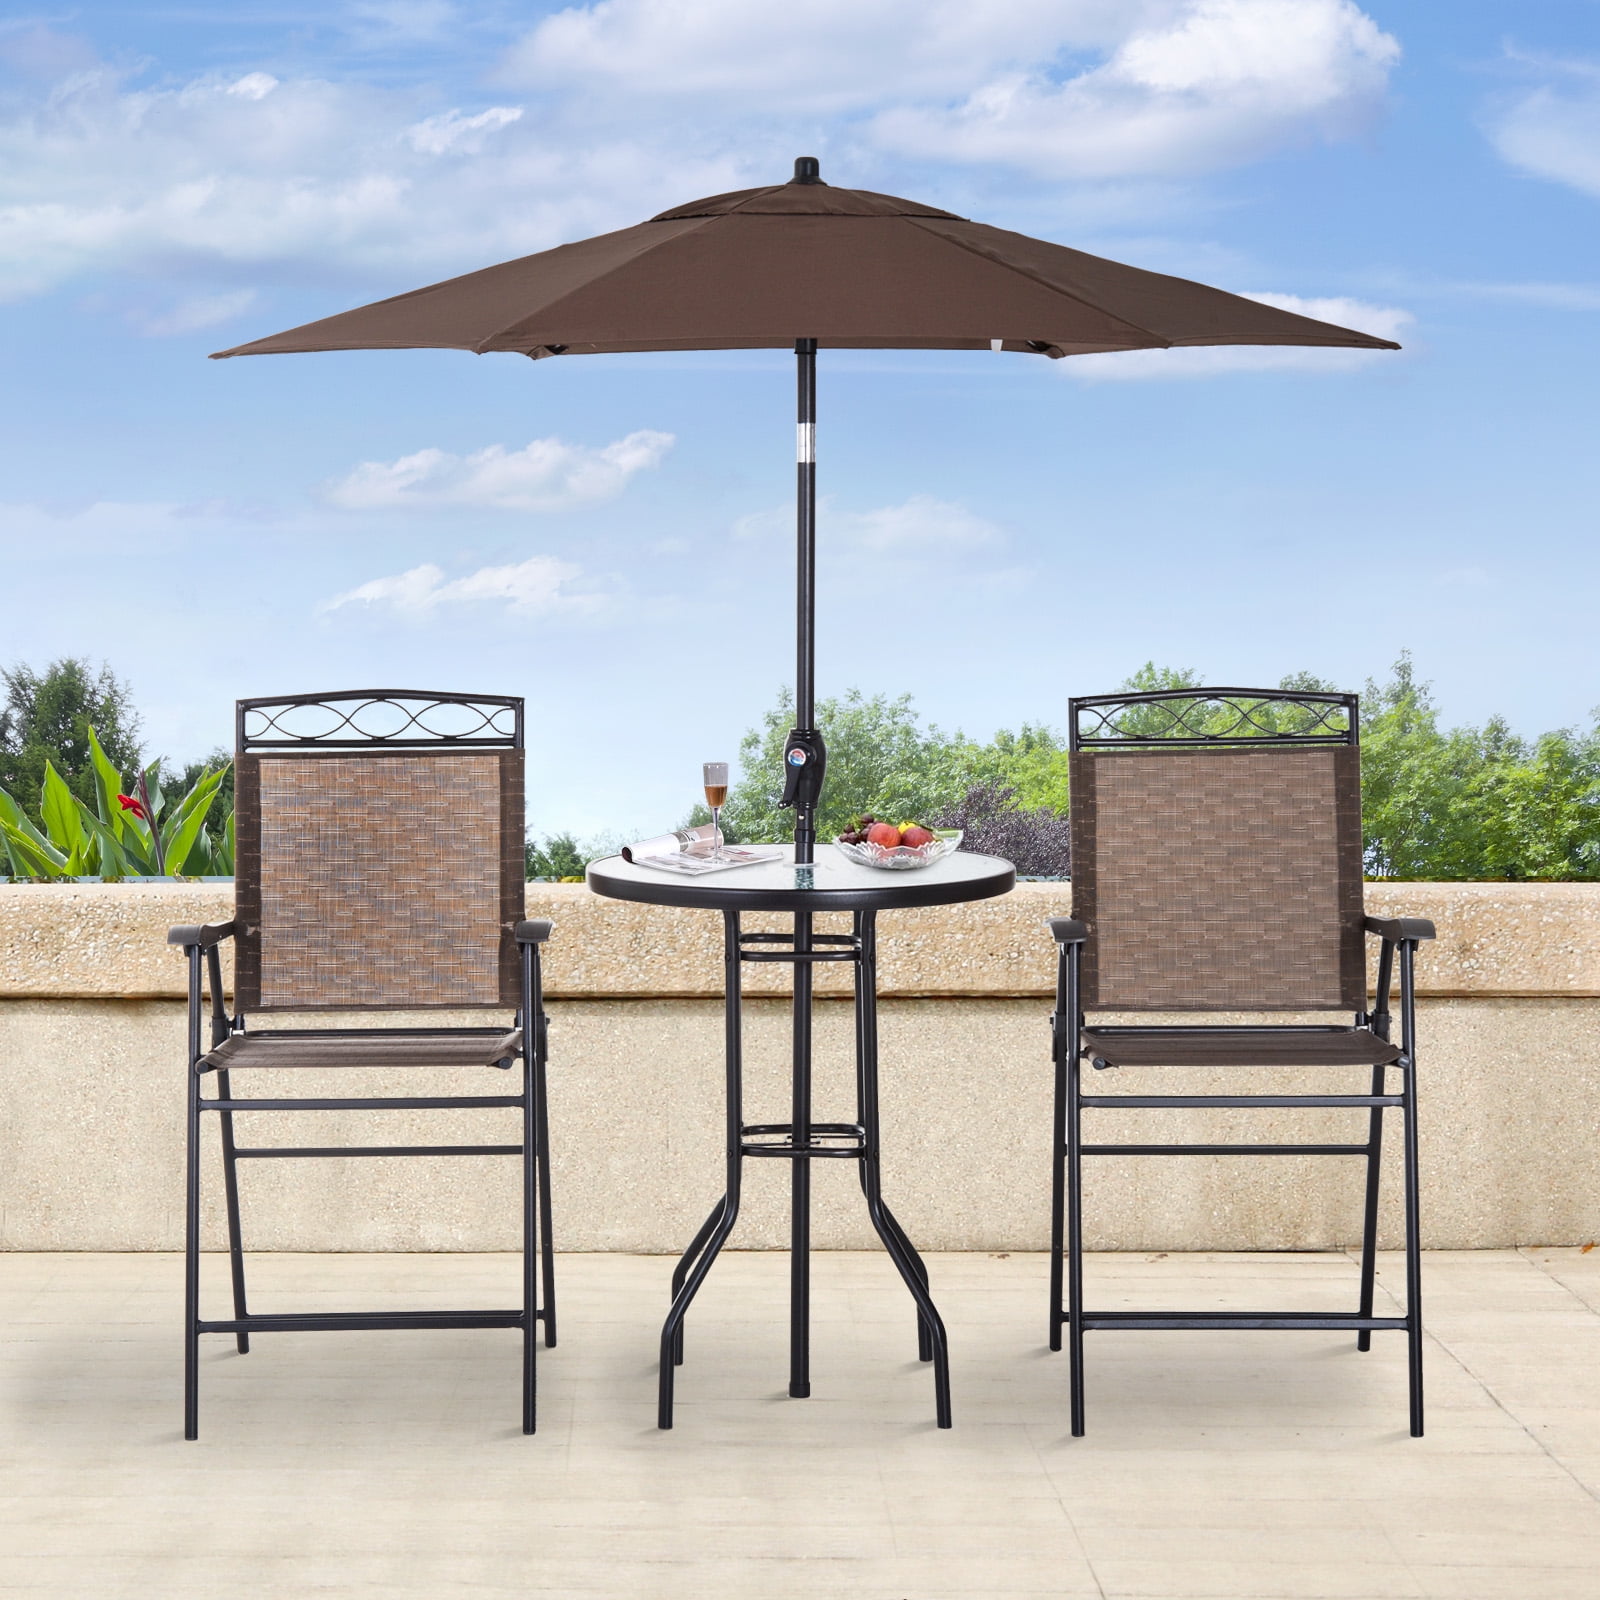 Ikayaa 4 Piece Folding Outdoor Patio Pub Dining Table And Chairs Set With 6 Adjustable Tilt Umbrella Com - Outdoor Patio Table With Umbrella Set